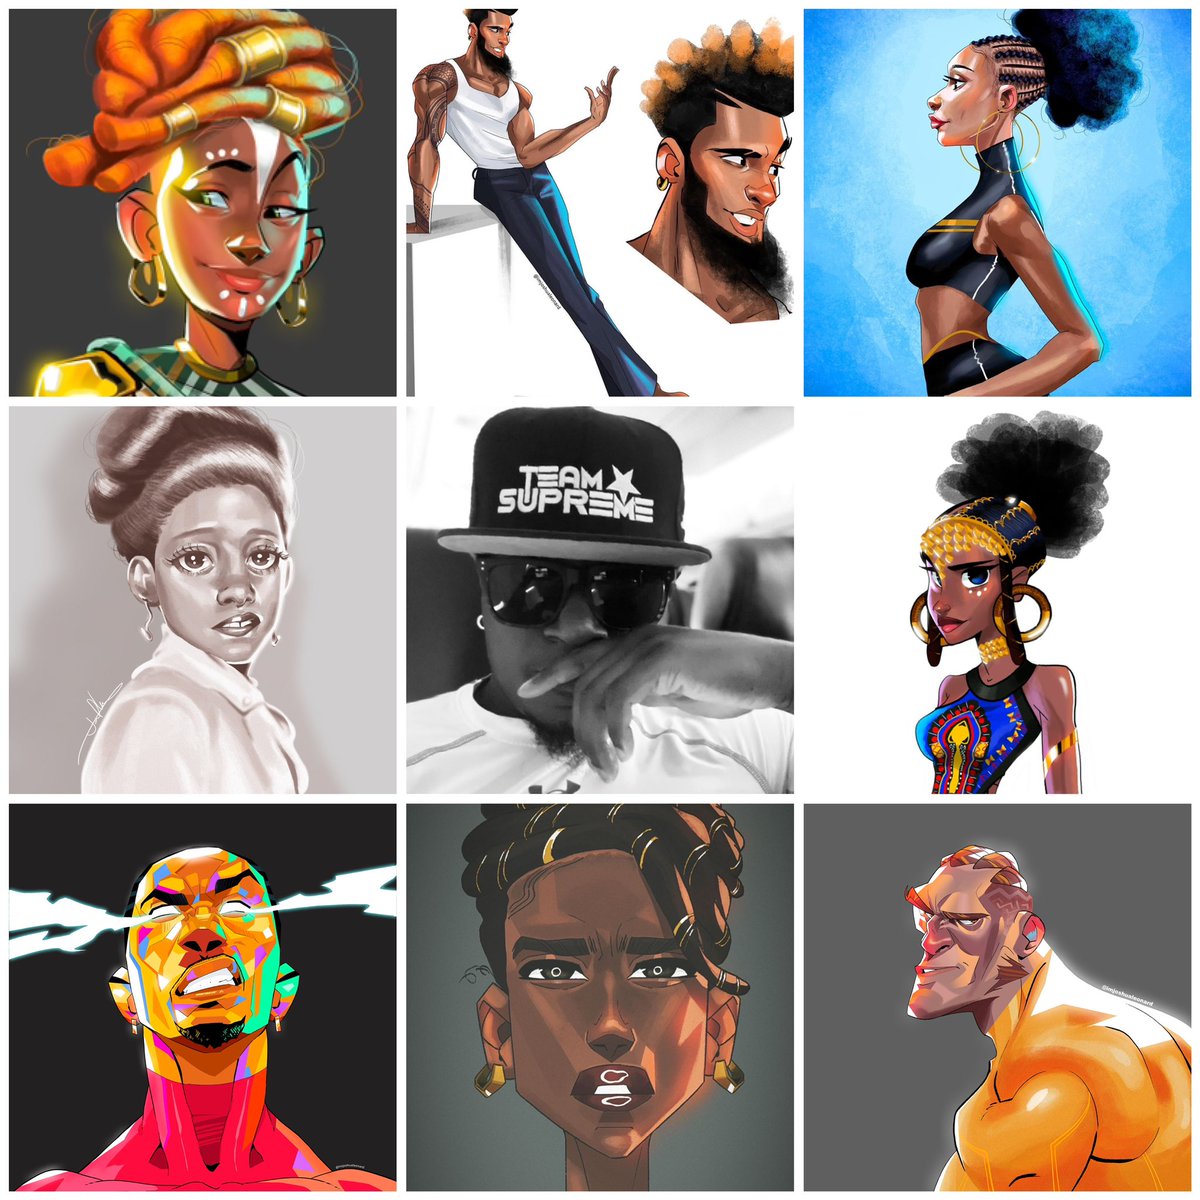 Each year gets better and better. As always, thank you all for supporting my work and I, you are greatly appreciated. 🫡 #joshualeonardart #leonardstudios #wacom #madewithwacom #animation #characterdesign #characterdesigner #drawingwhileblack #animationch @wacom